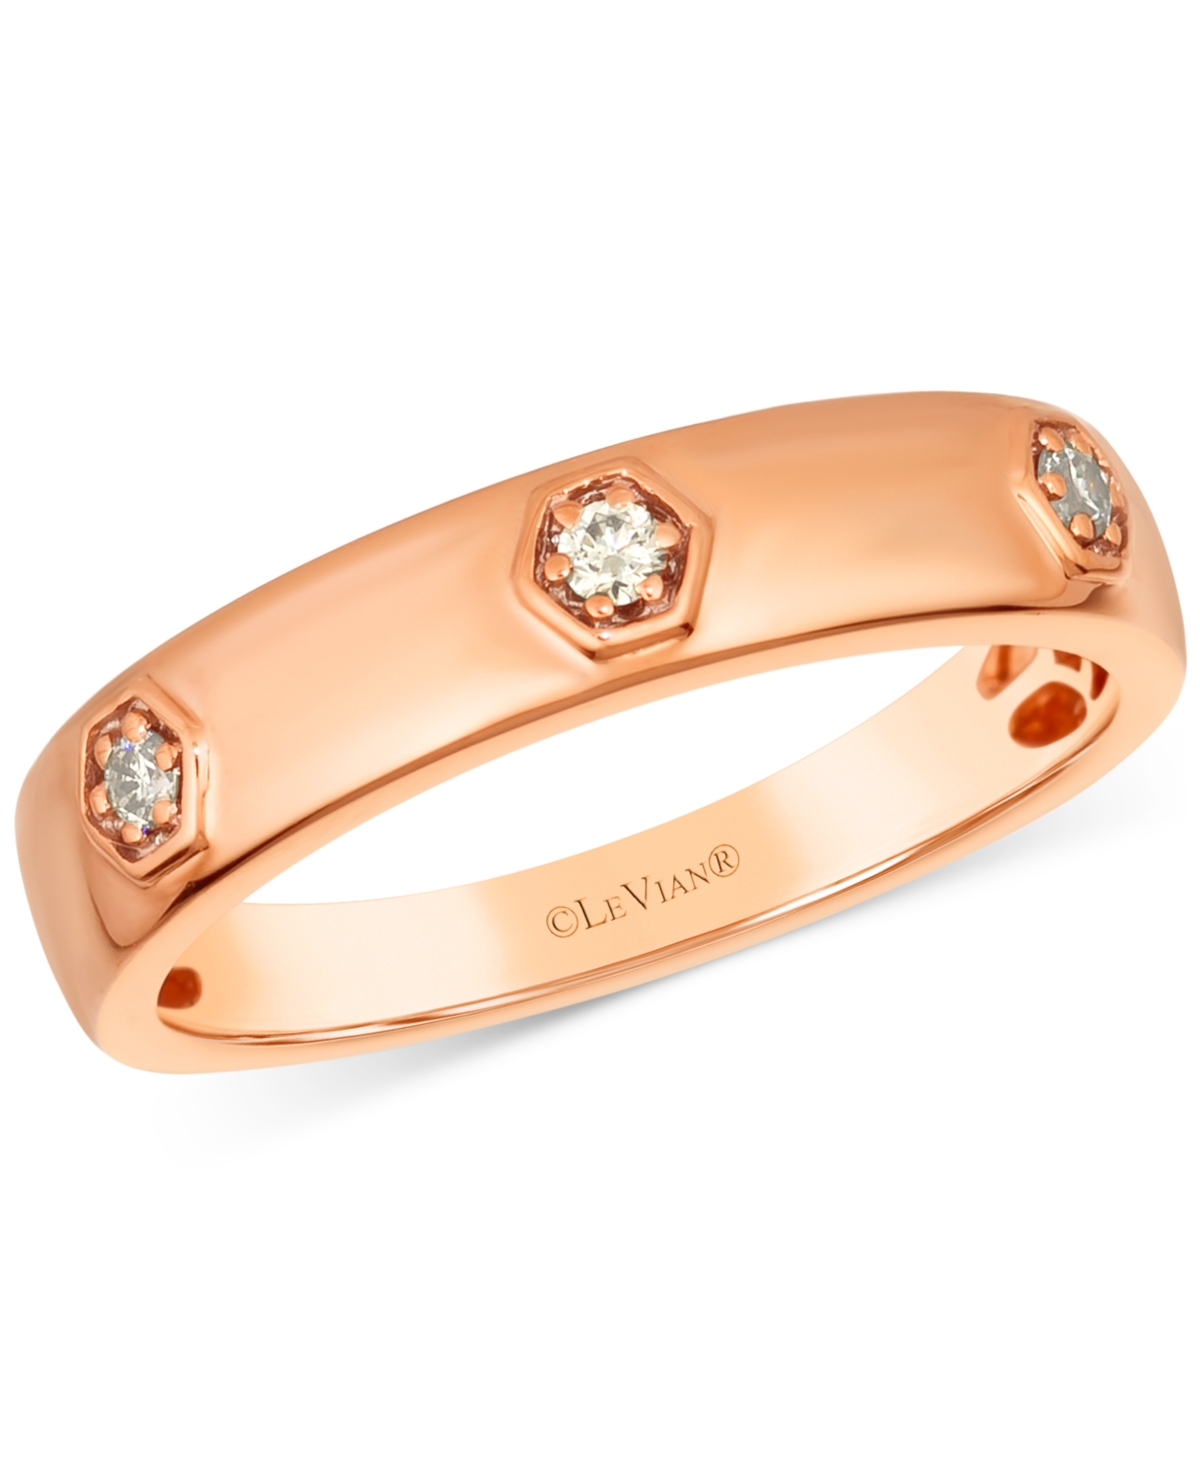 Anywear Everywear Nude Diamond Polished Band (1/10 ct. t.w.) in 14k Gold (Also Available in Rose Gold or White Gold) - K Strawberry Gold Ring